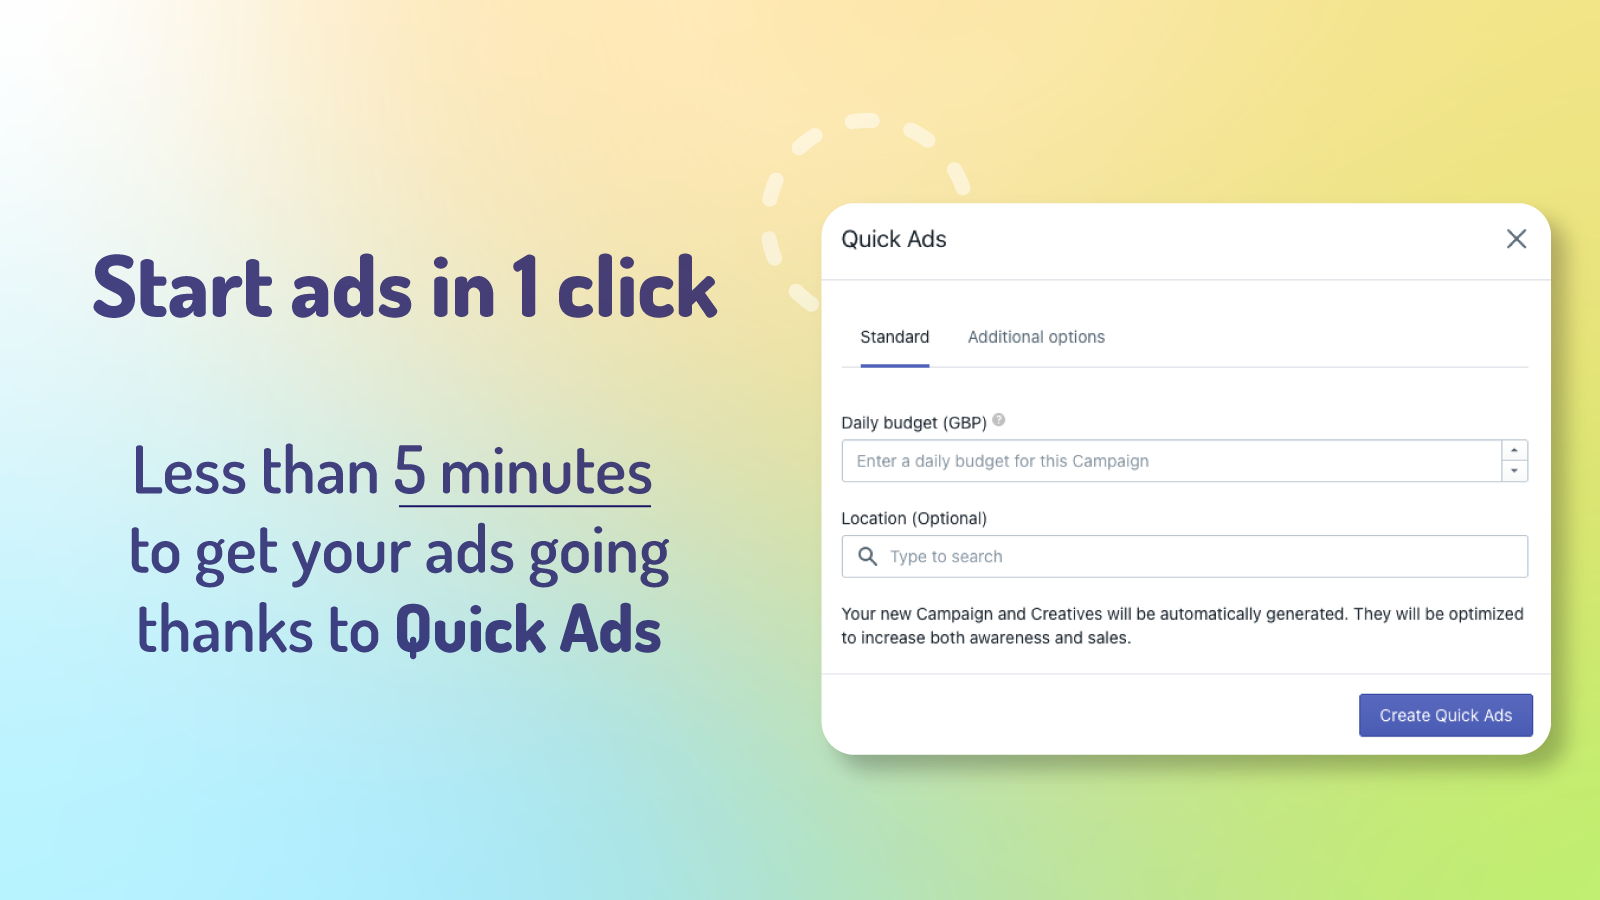 Start ads in 1 click: Less than 5 minutes to get your ads going